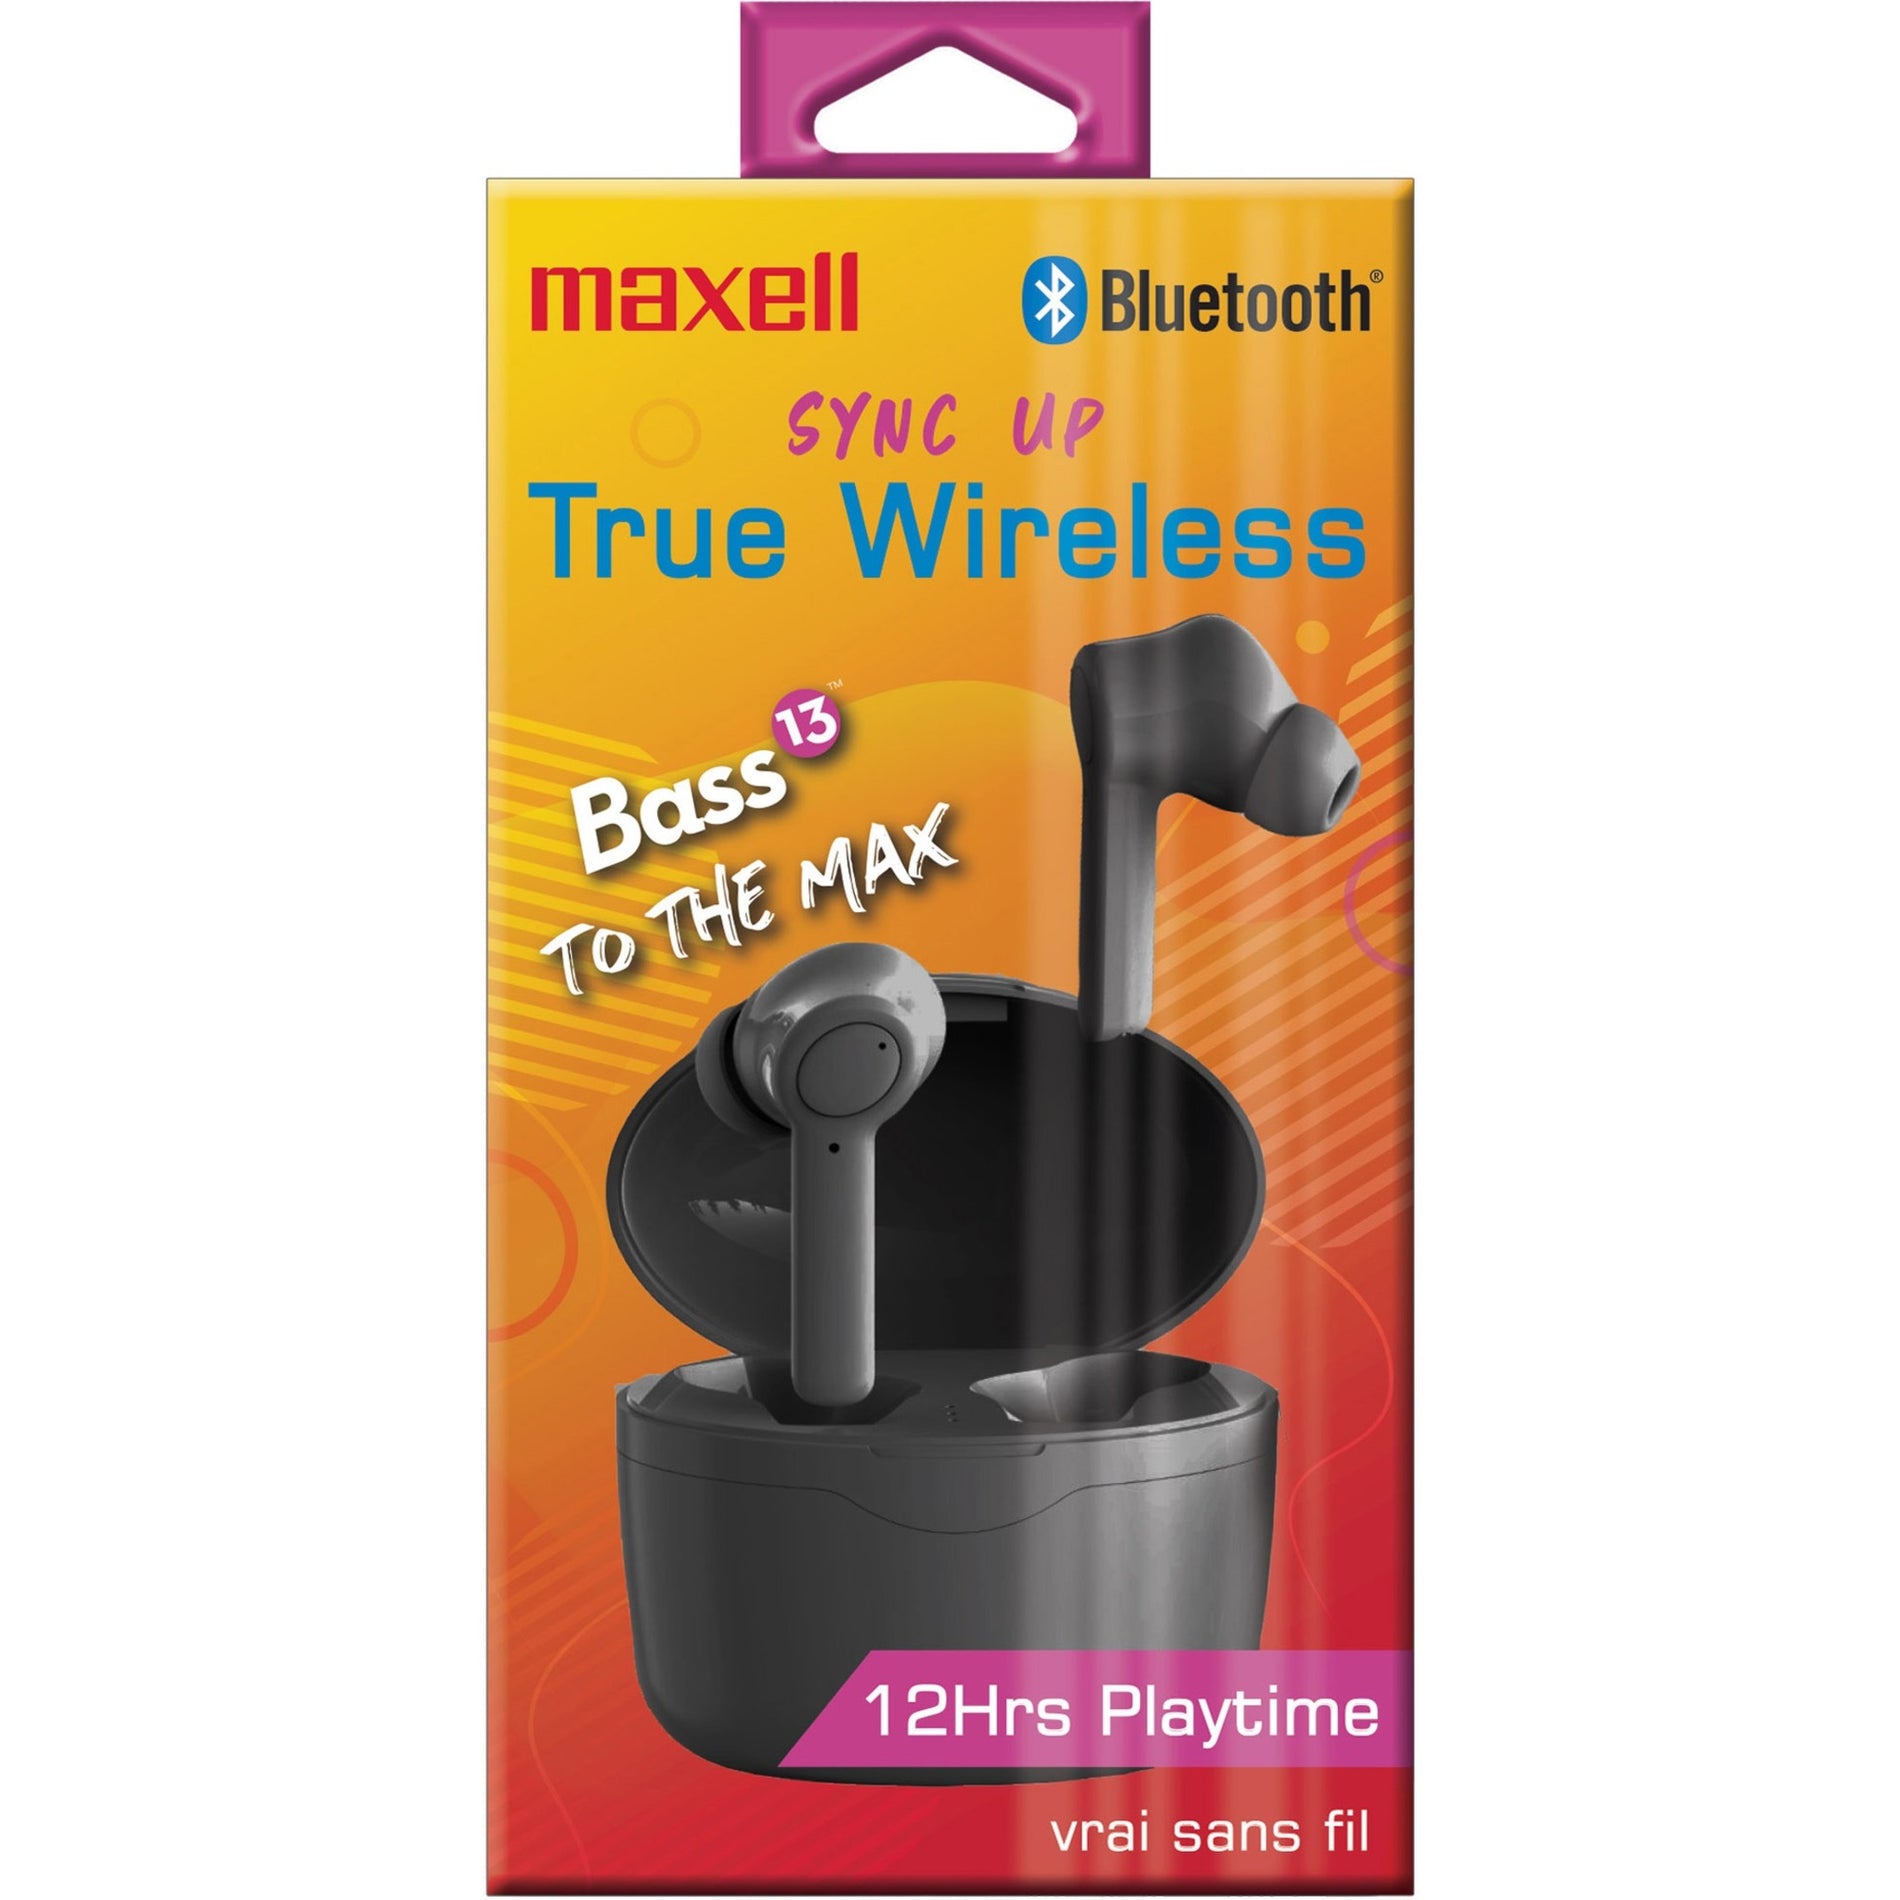 Maxell 199899 Sync Up True Wireless Bluetooth Earbuds, Secure Fit, Charging Case, Black